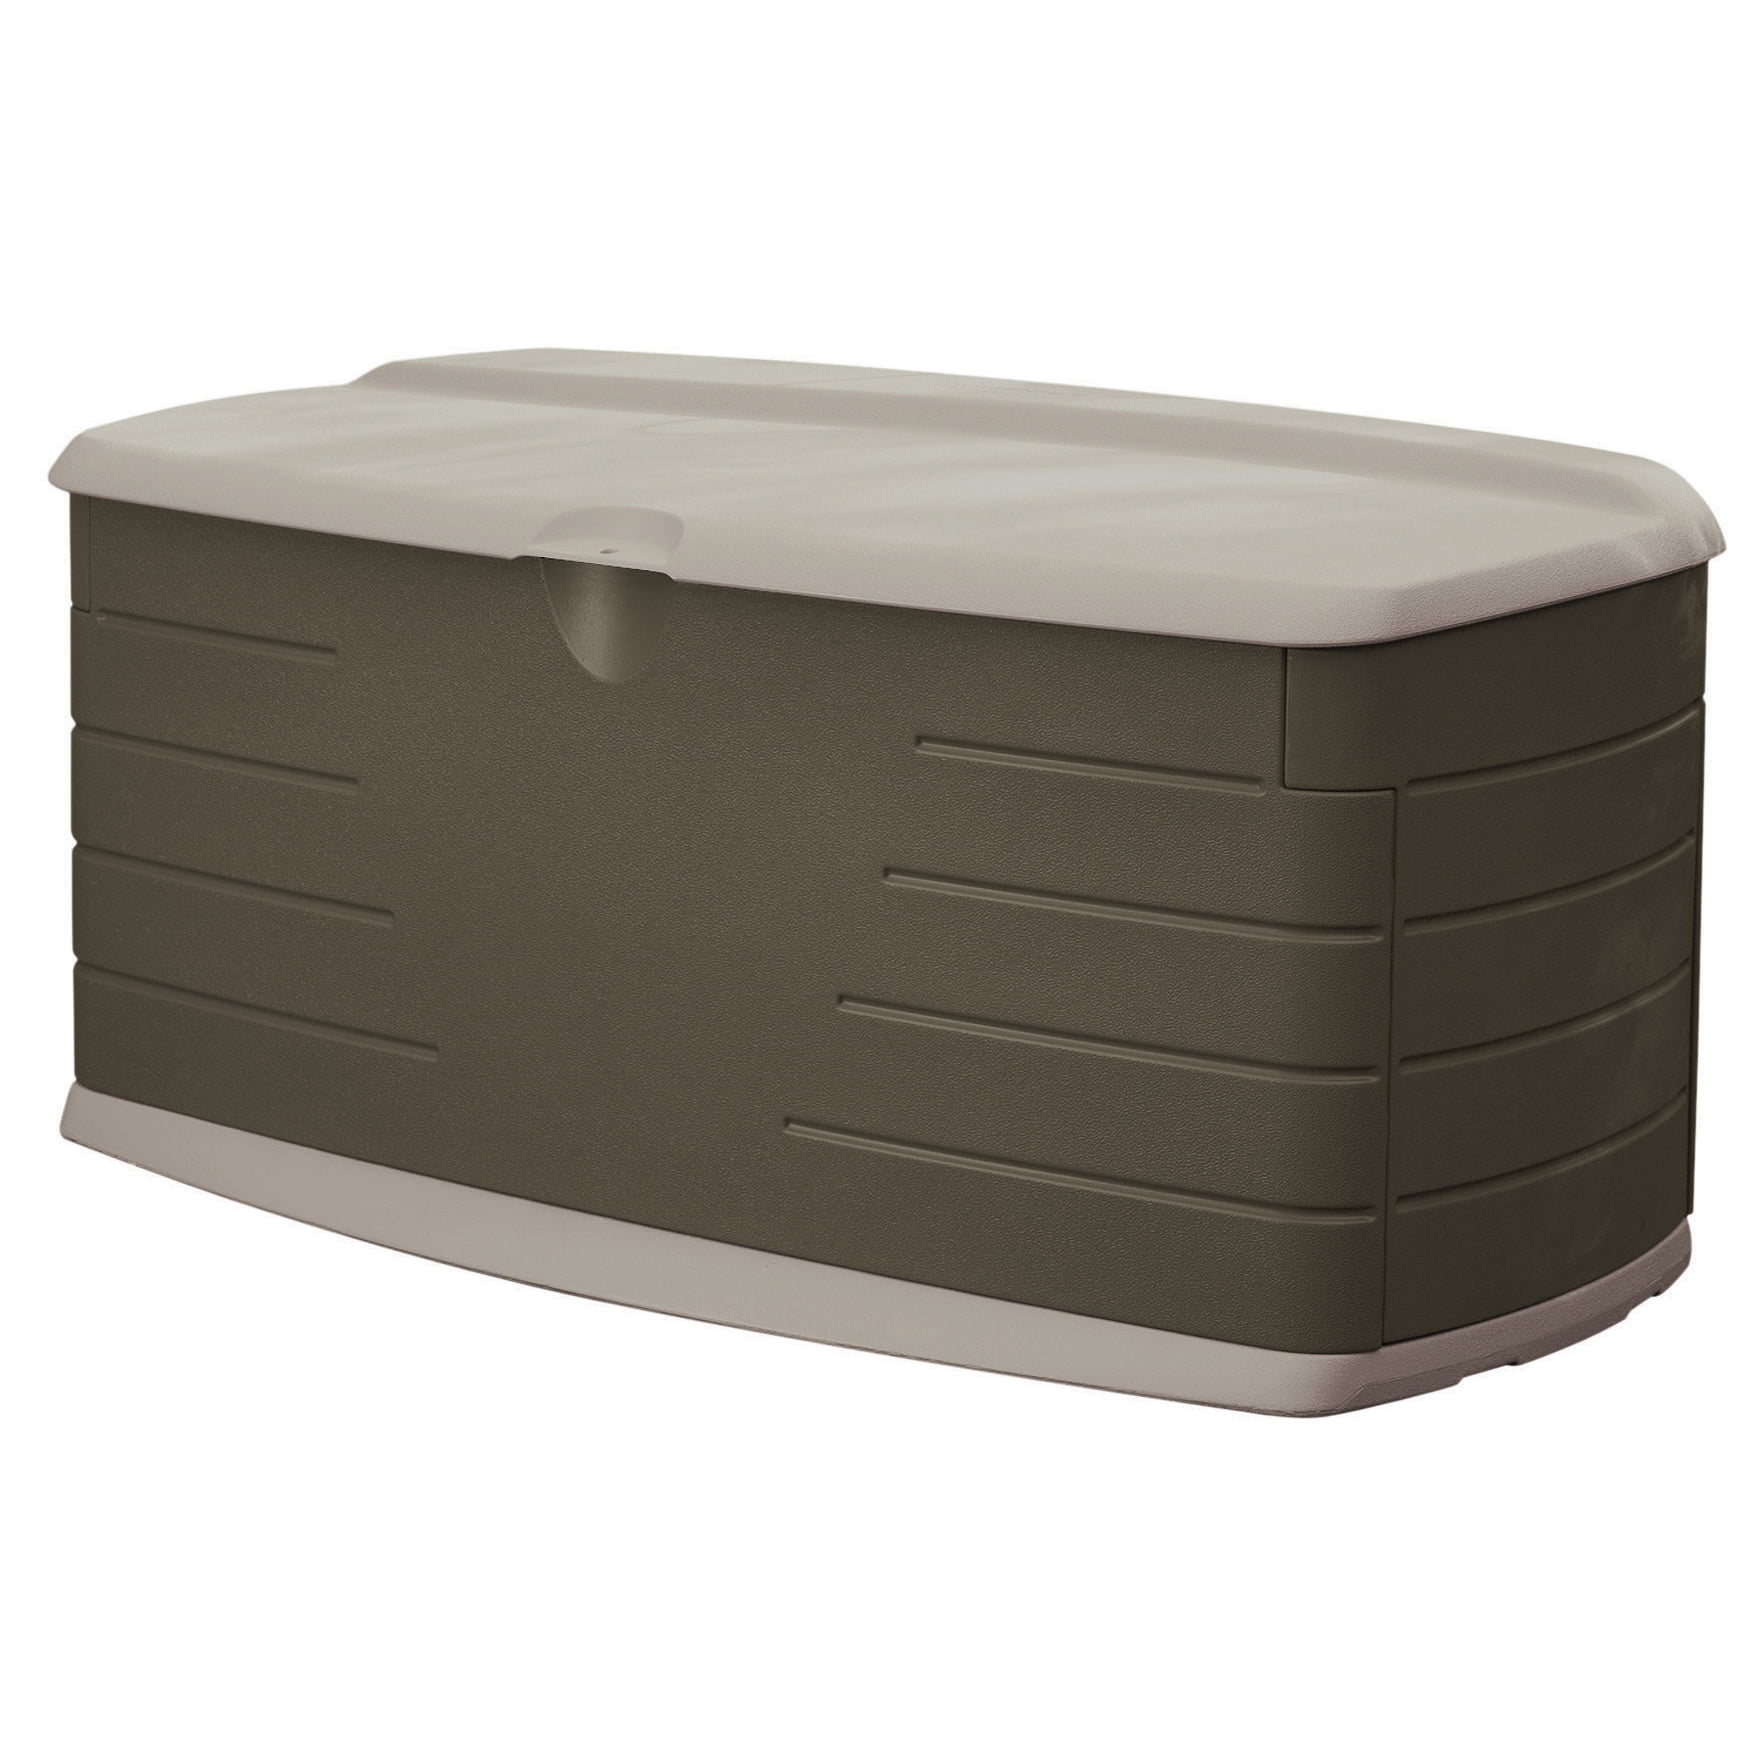 Rubbermaid Outdoor Large Deck Box with Seat, Green, 90 Gallon 57W